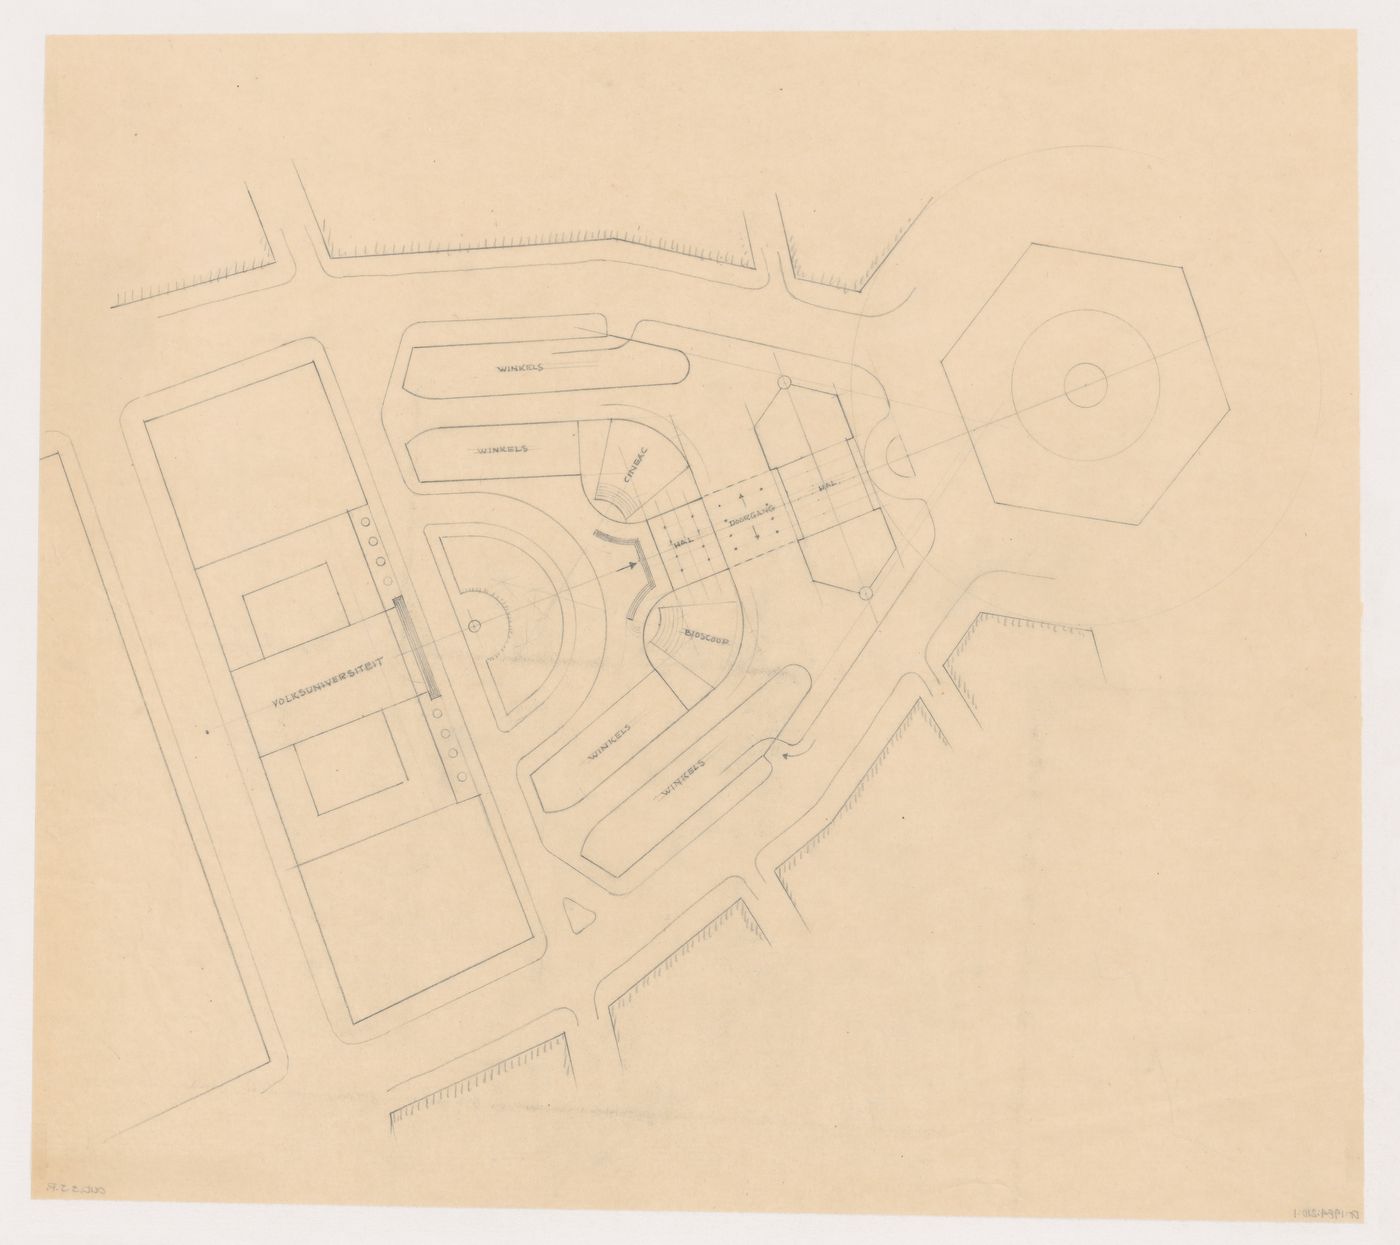 Ground floor plan for Industriegebouw Plan A and monument plaza for the reconstruction of the Hofplein (city centre), Rotterdam, Netherlands